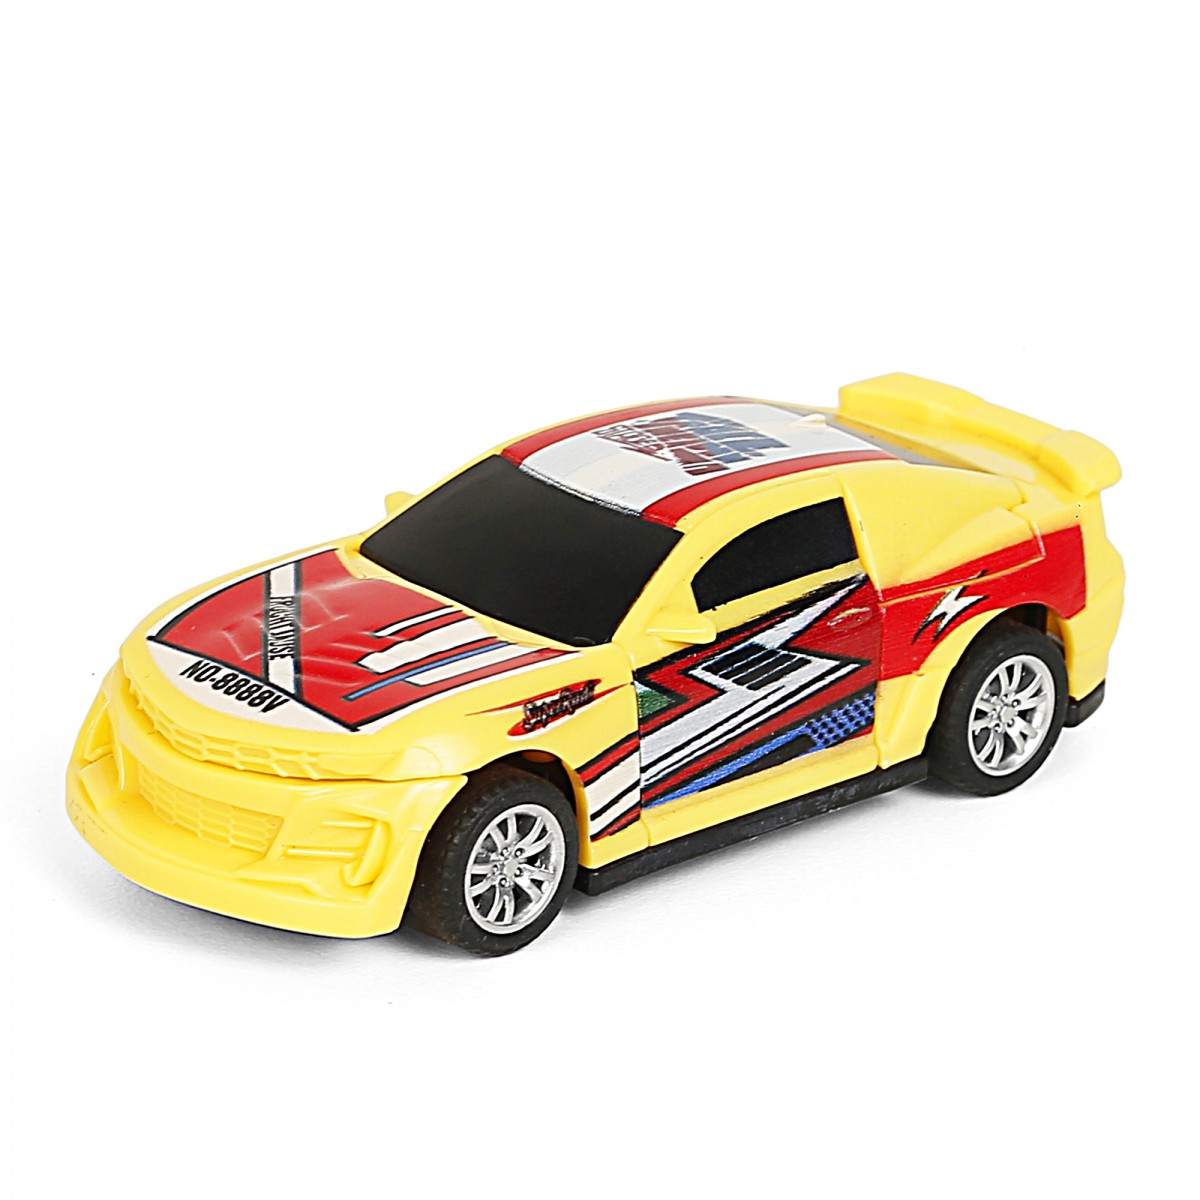 Ralleyz Pull Back Crash Car, 2 Modes Racing Stunt Vehicle Toy, Crash Car, Racing Toy, Friction High Speed Car, Kids for 3Y+, Yellow